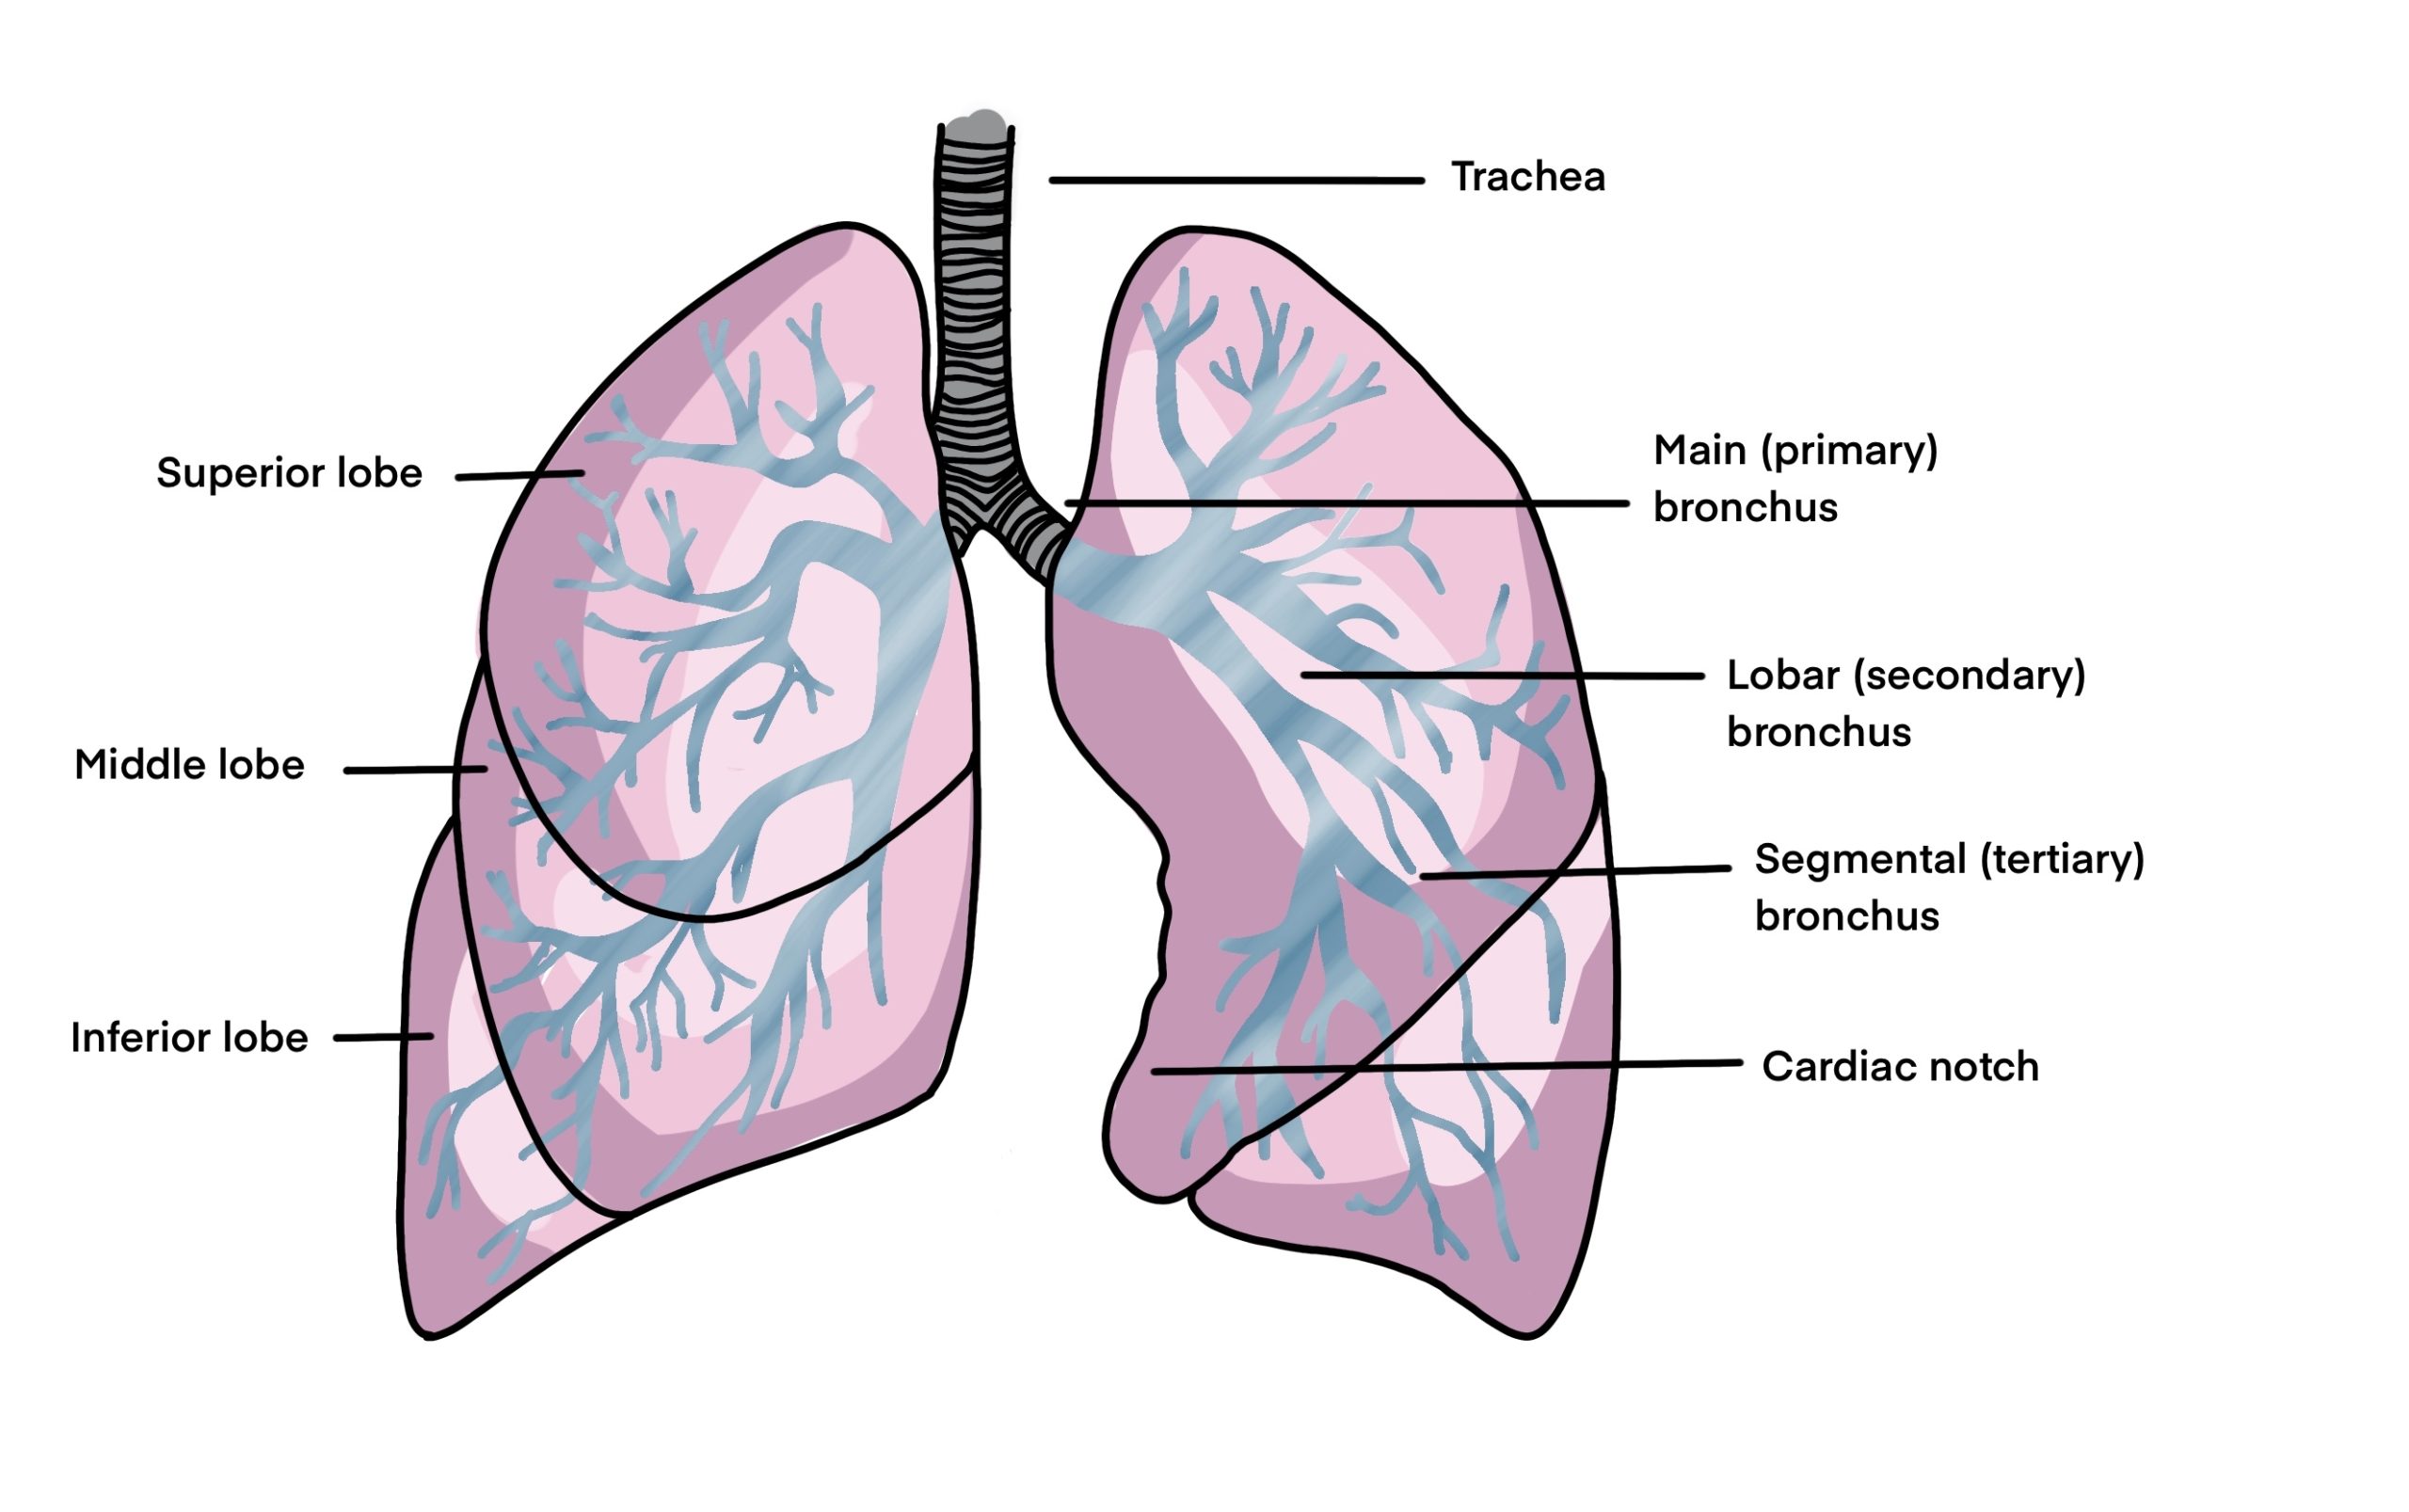 Sublobar Resection Versus Lobectomy in Lung Cancer | Docwire News